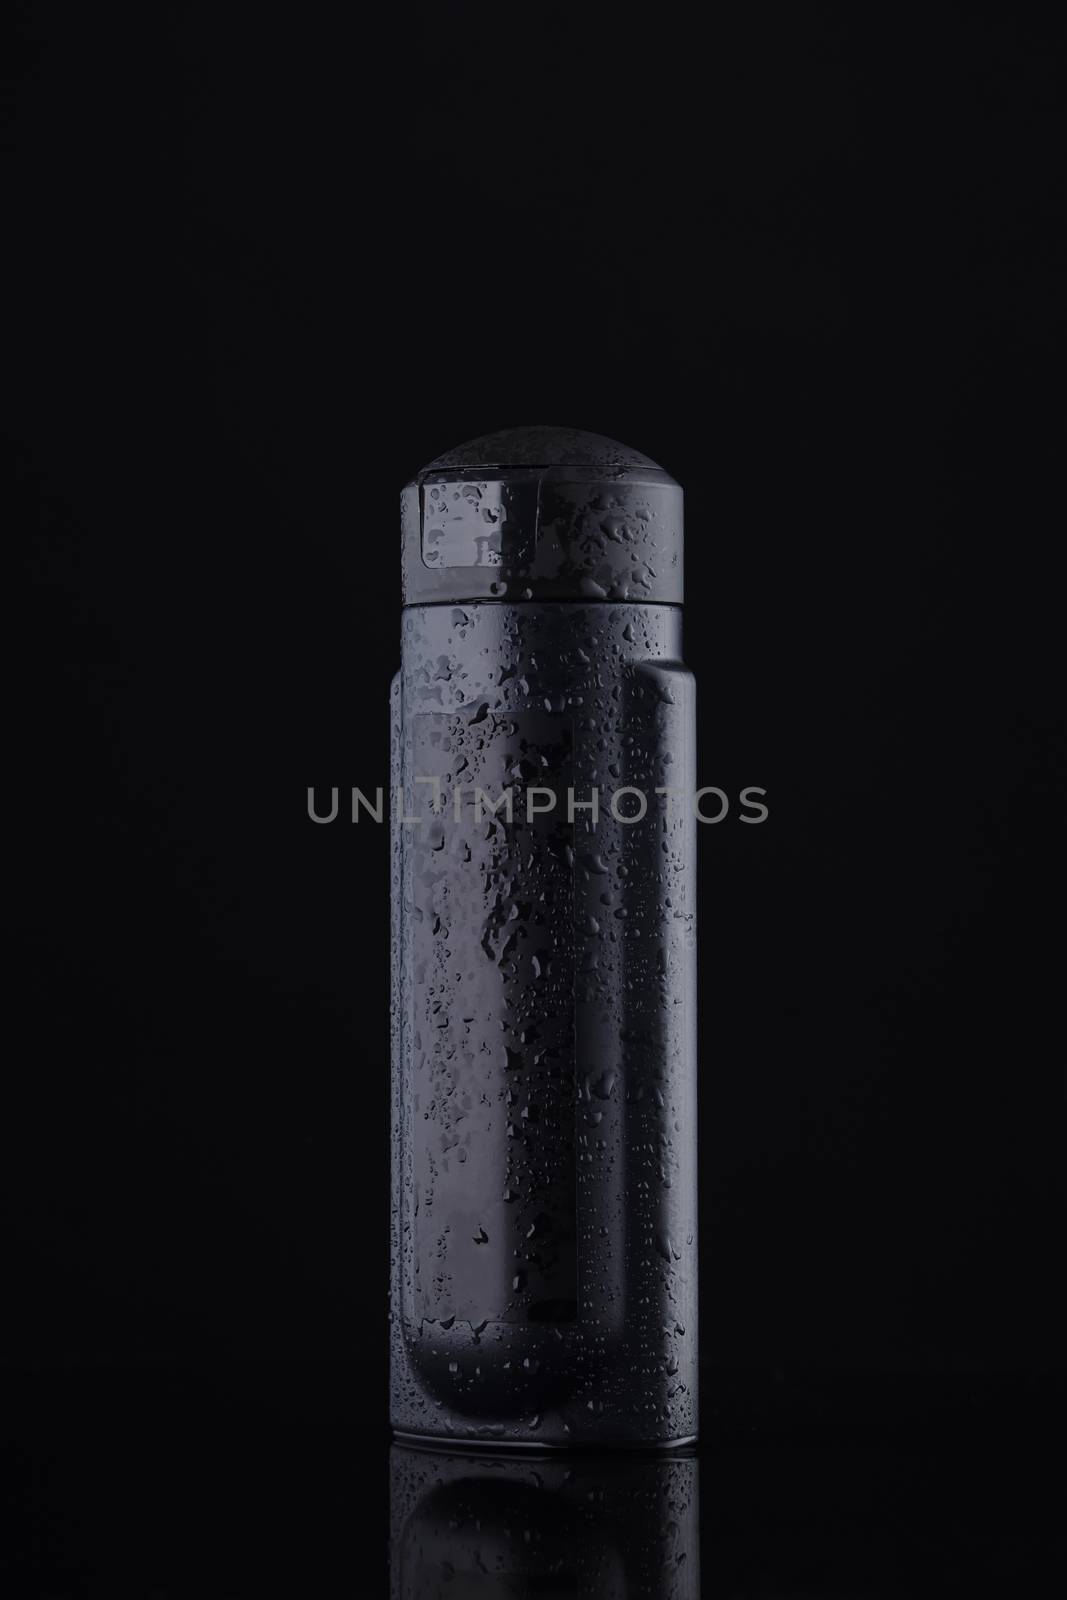 Black capacity for liquids and shampoo on a black background. The black color is a symbol of purity and order in a simple style.